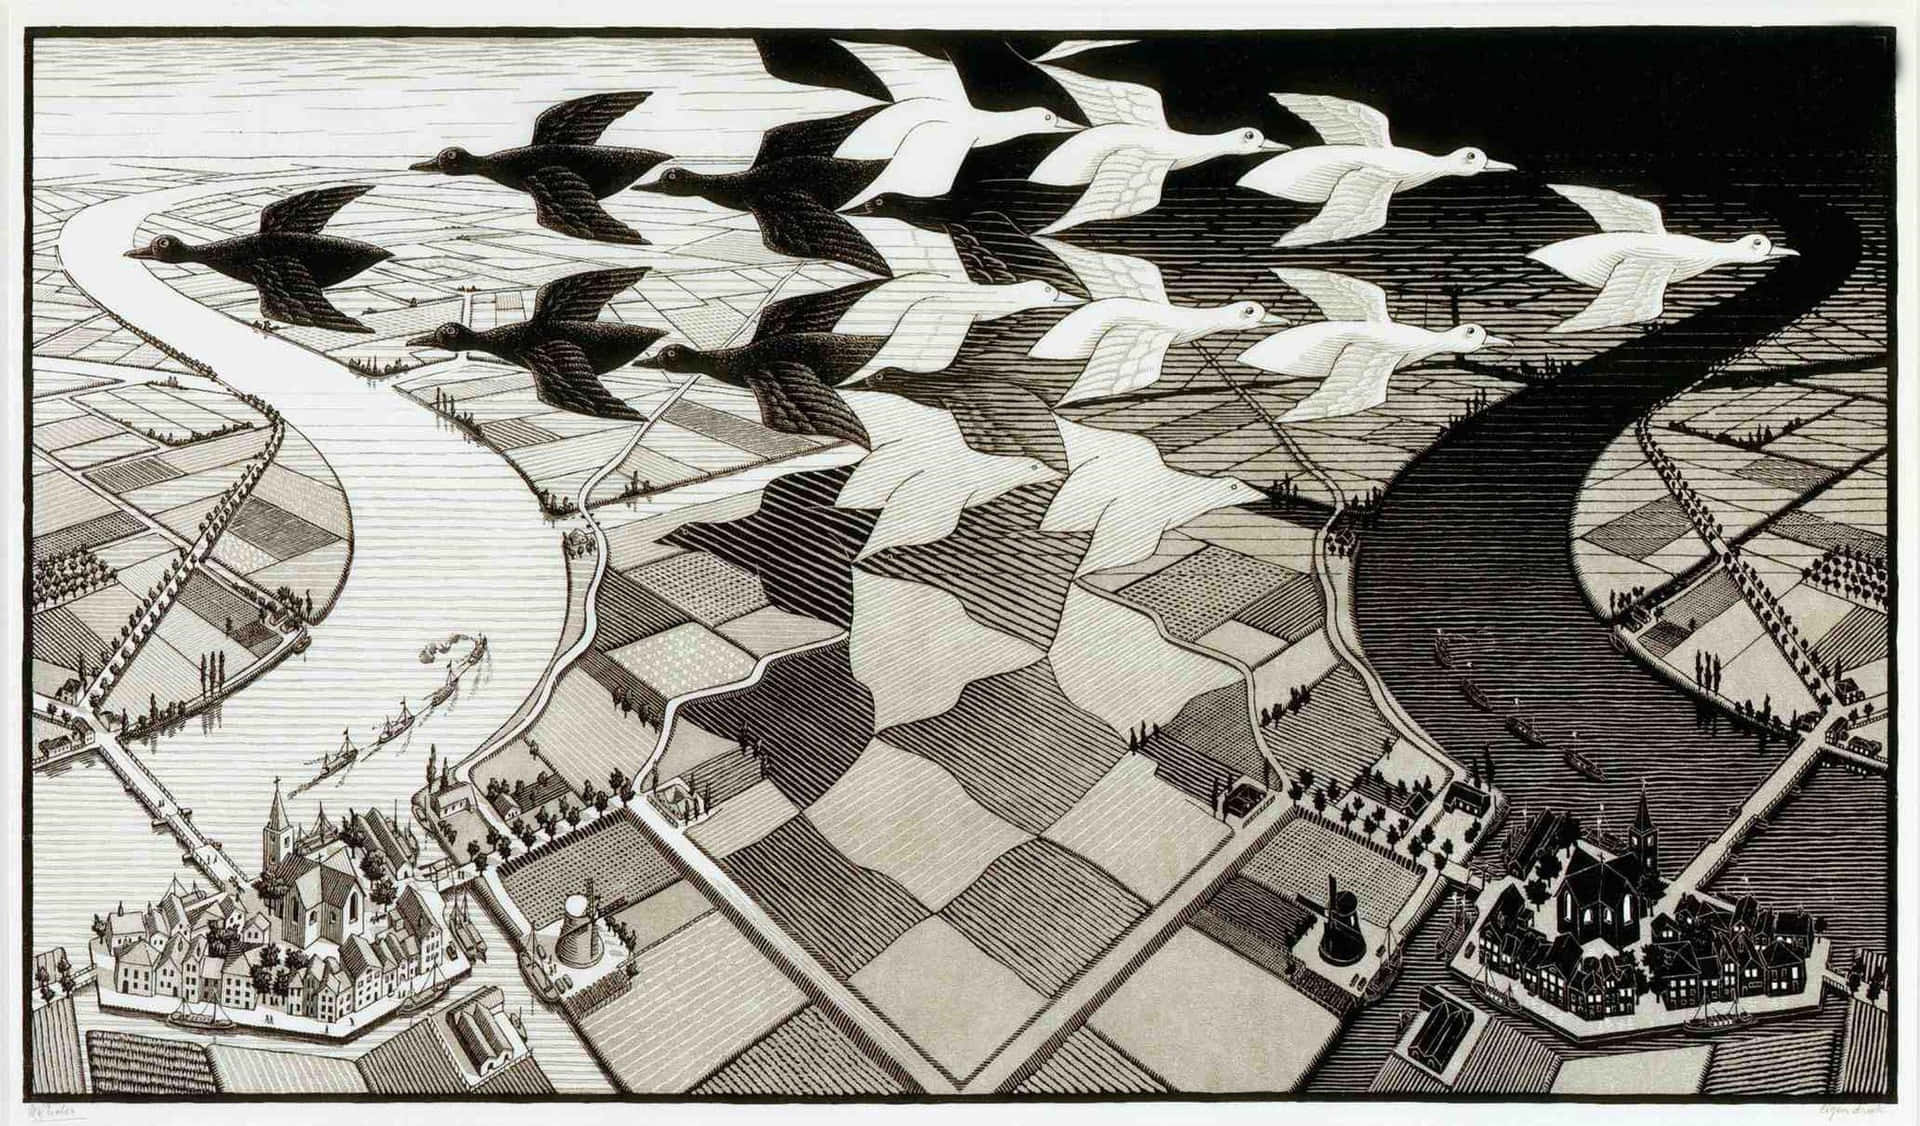 A Black And White Drawing Of A Flock Of Birds Flying Over A City Background